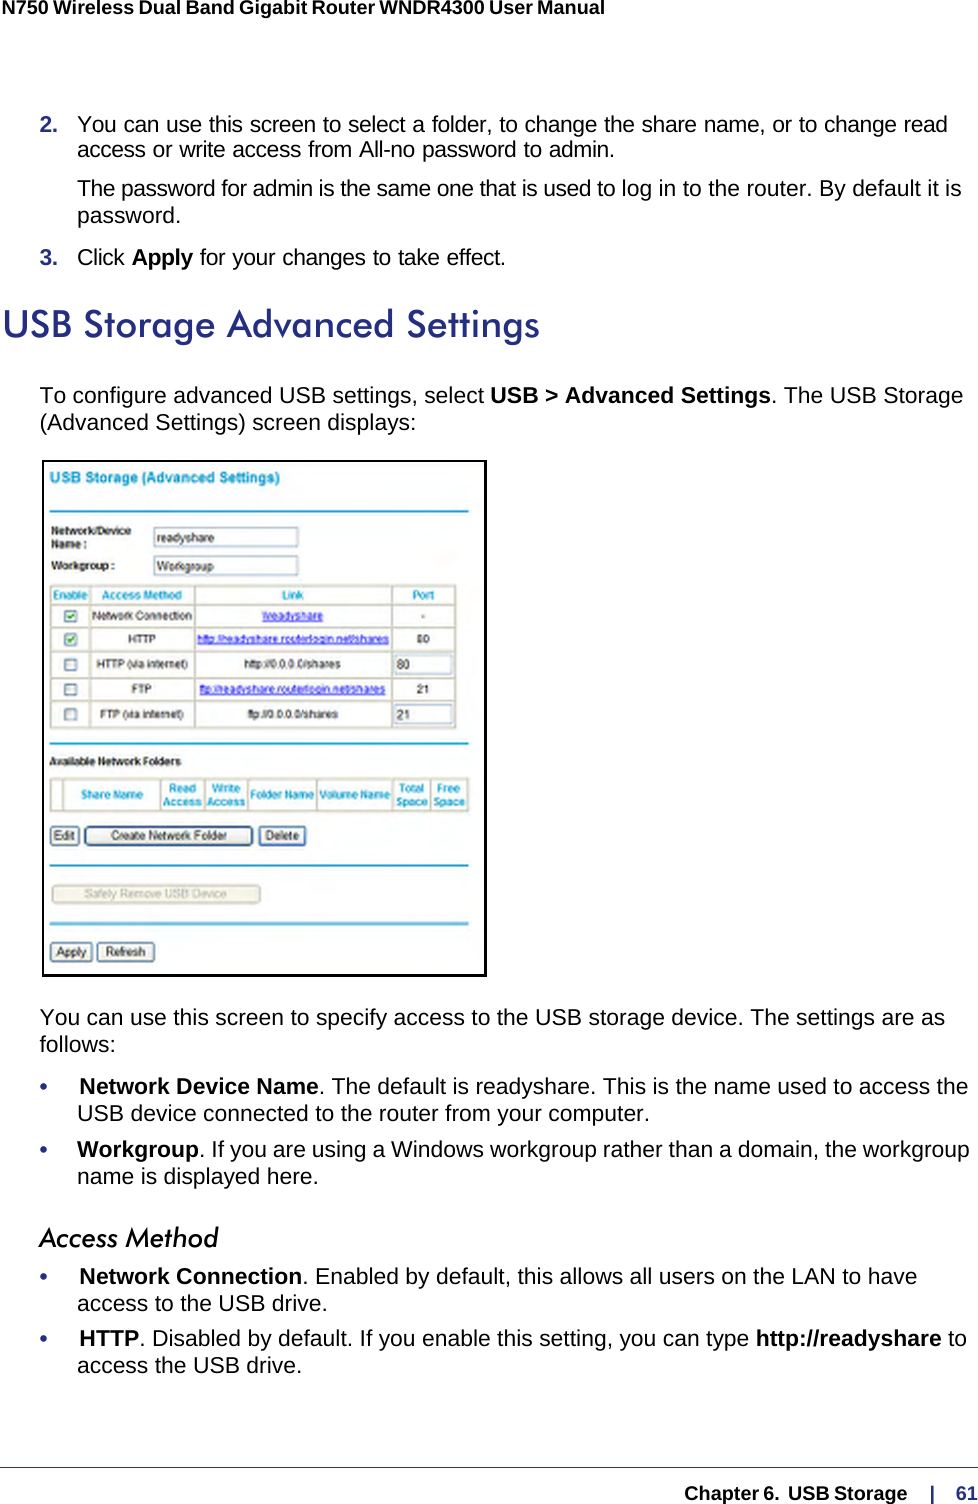   Chapter 6.  USB Storage     |    61N750 Wireless Dual Band Gigabit Router WNDR4300 User Manual 2.  You can use this screen to select a folder, to change the share name, or to change read access or write access from All-no password to admin. The password for admin is the same one that is used to log in to the router. By default it is password.3.  Click Apply for your changes to take effect.USB Storage Advanced SettingsTo configure advanced USB settings, select USB &gt; Advanced Settings. The USB Storage (Advanced Settings) screen displays:You can use this screen to specify access to the USB storage device. The settings are as follows:•     Network Device Name. The default is readyshare. This is the name used to access the USB device connected to the router from your computer.•     Workgroup. If you are using a Windows workgroup rather than a domain, the workgroup name is displayed here.Access Method•     Network Connection. Enabled by default, this allows all users on the LAN to have access to the USB drive.•     HTTP. Disabled by default. If you enable this setting, you can type http://readyshare to access the USB drive.